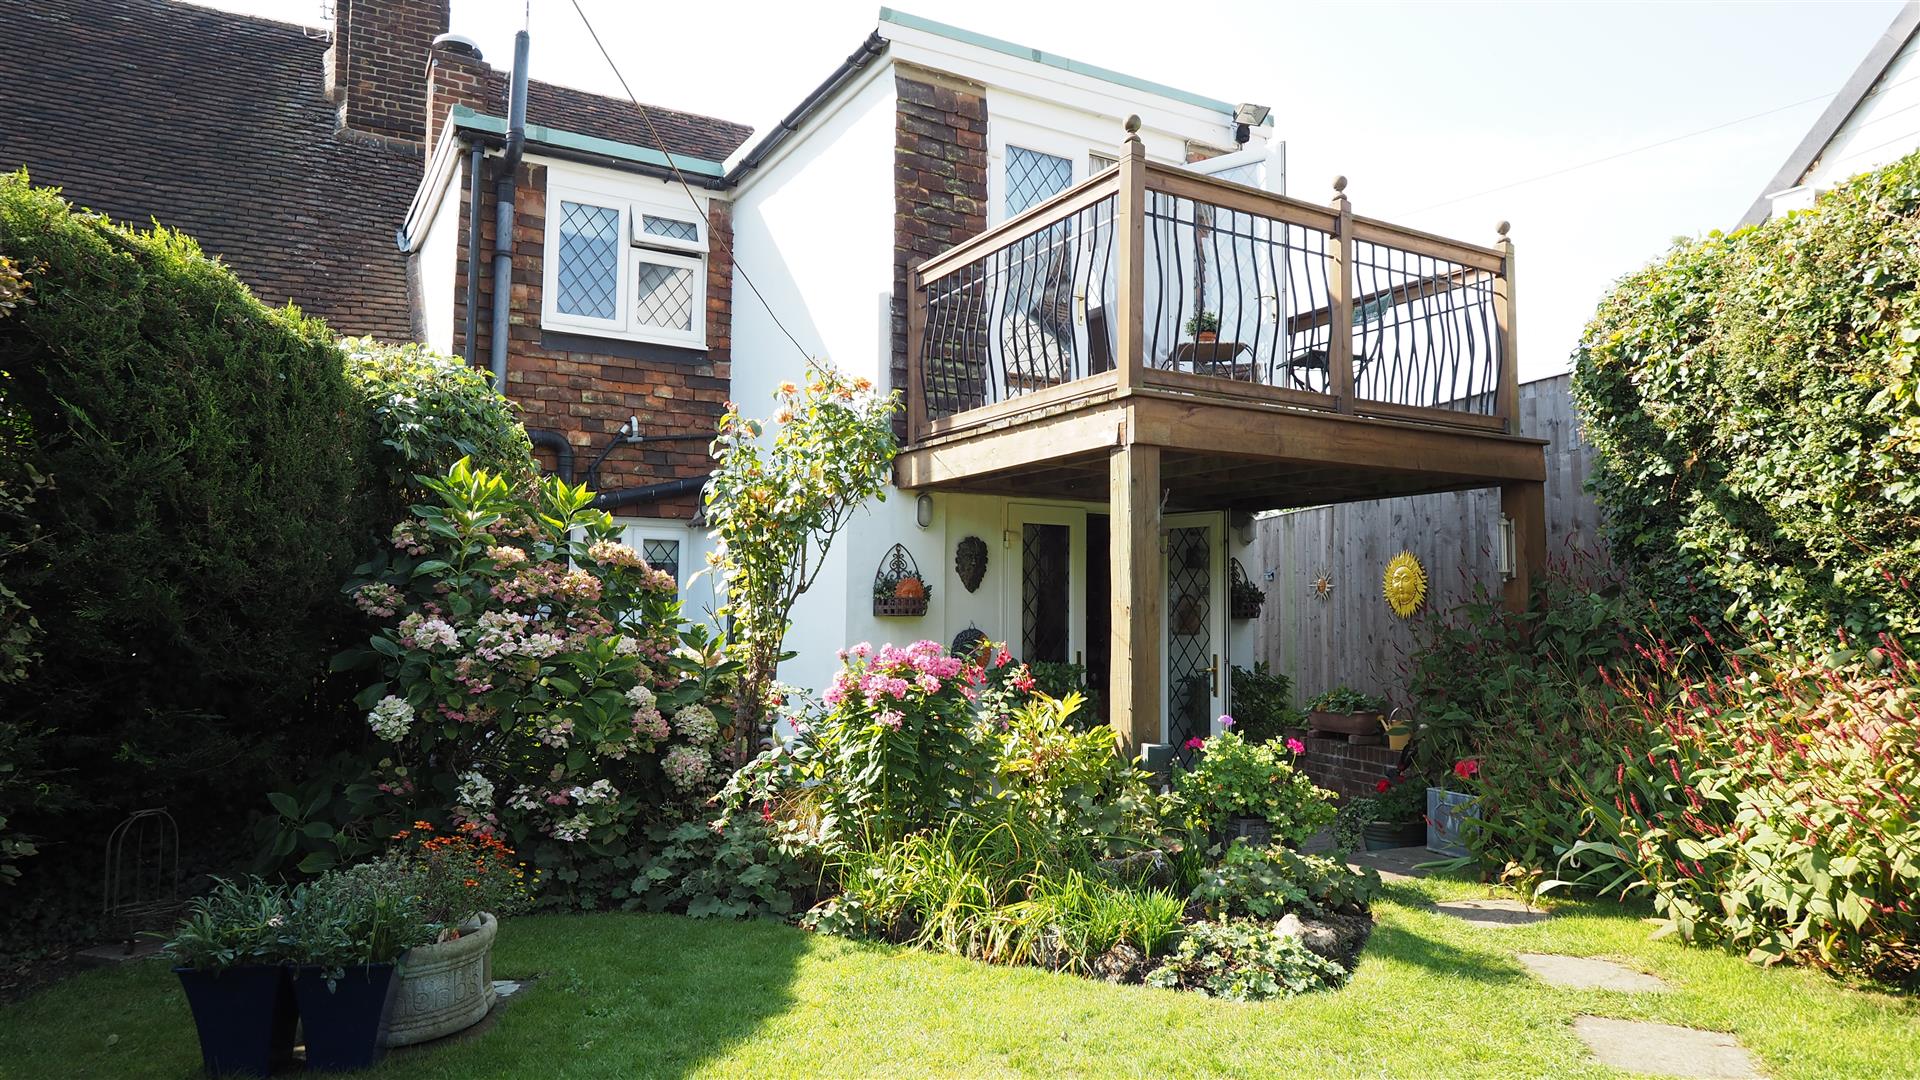 3 bedroom Semi-Detached House for sale in Maidstone